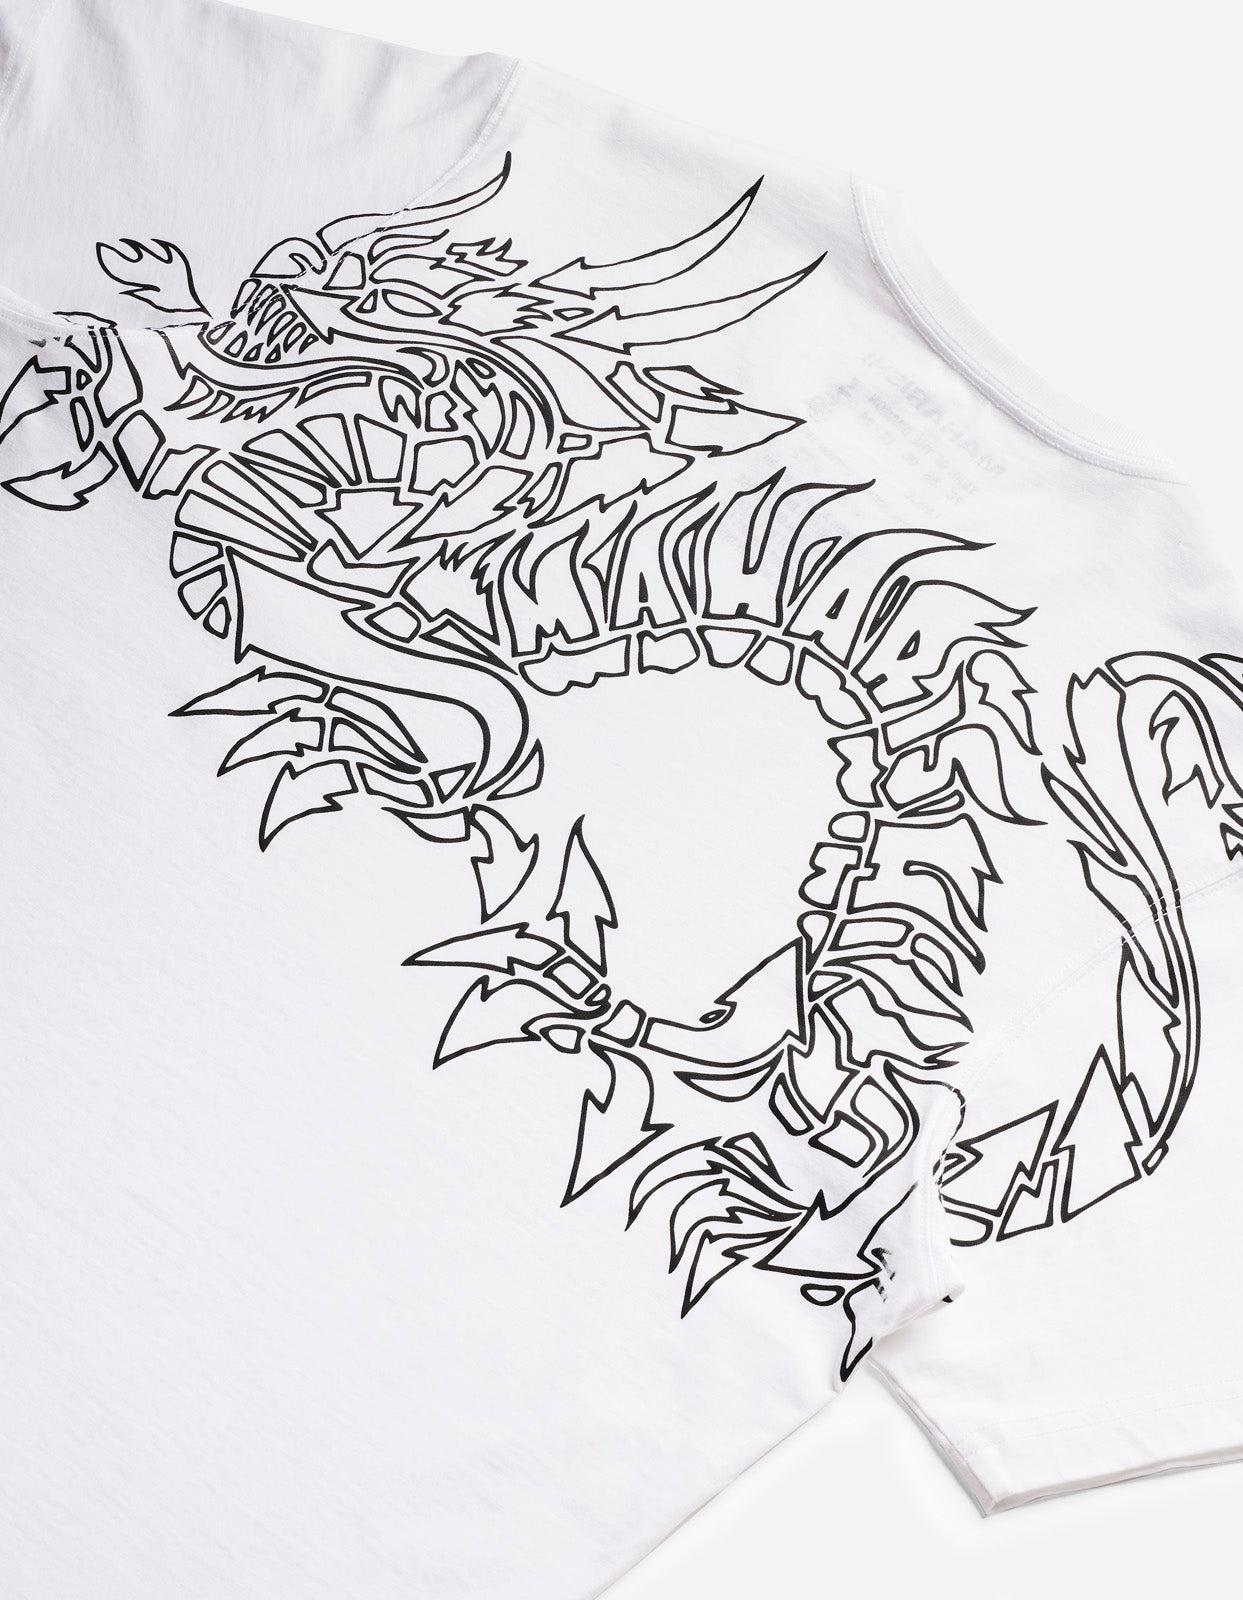 1256 Distorted Dragon T-Shirt · Guest Artist: Kay One White